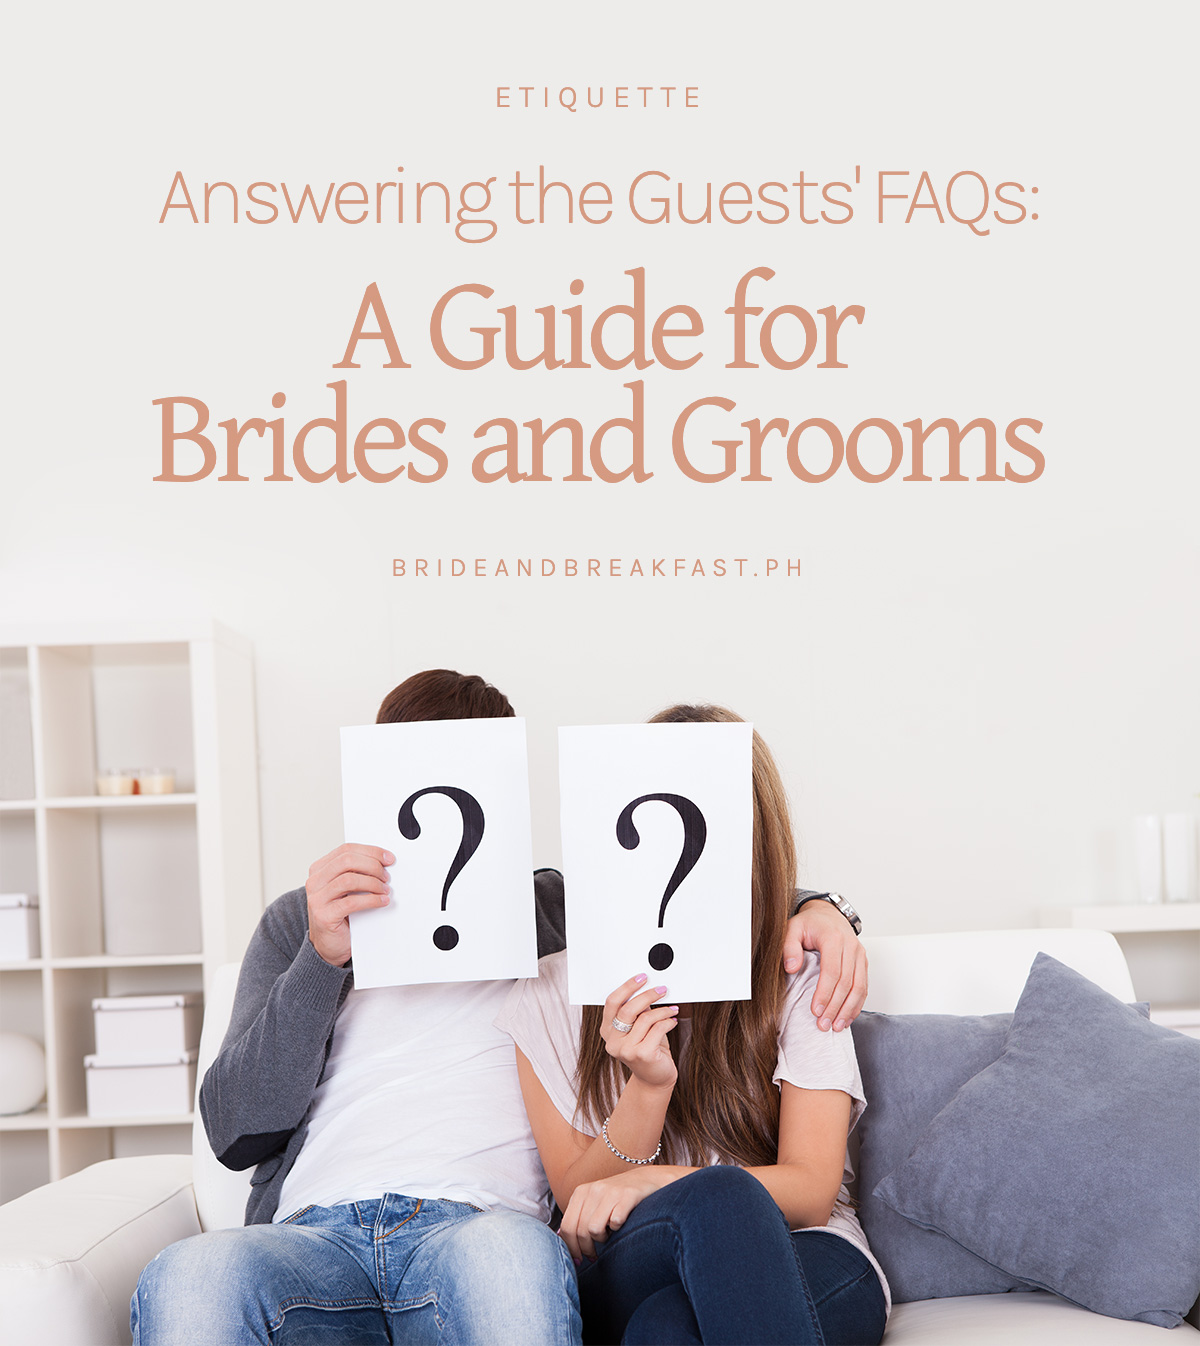 Answering the Guests' FAQs: A Guide for Brides and Grooms